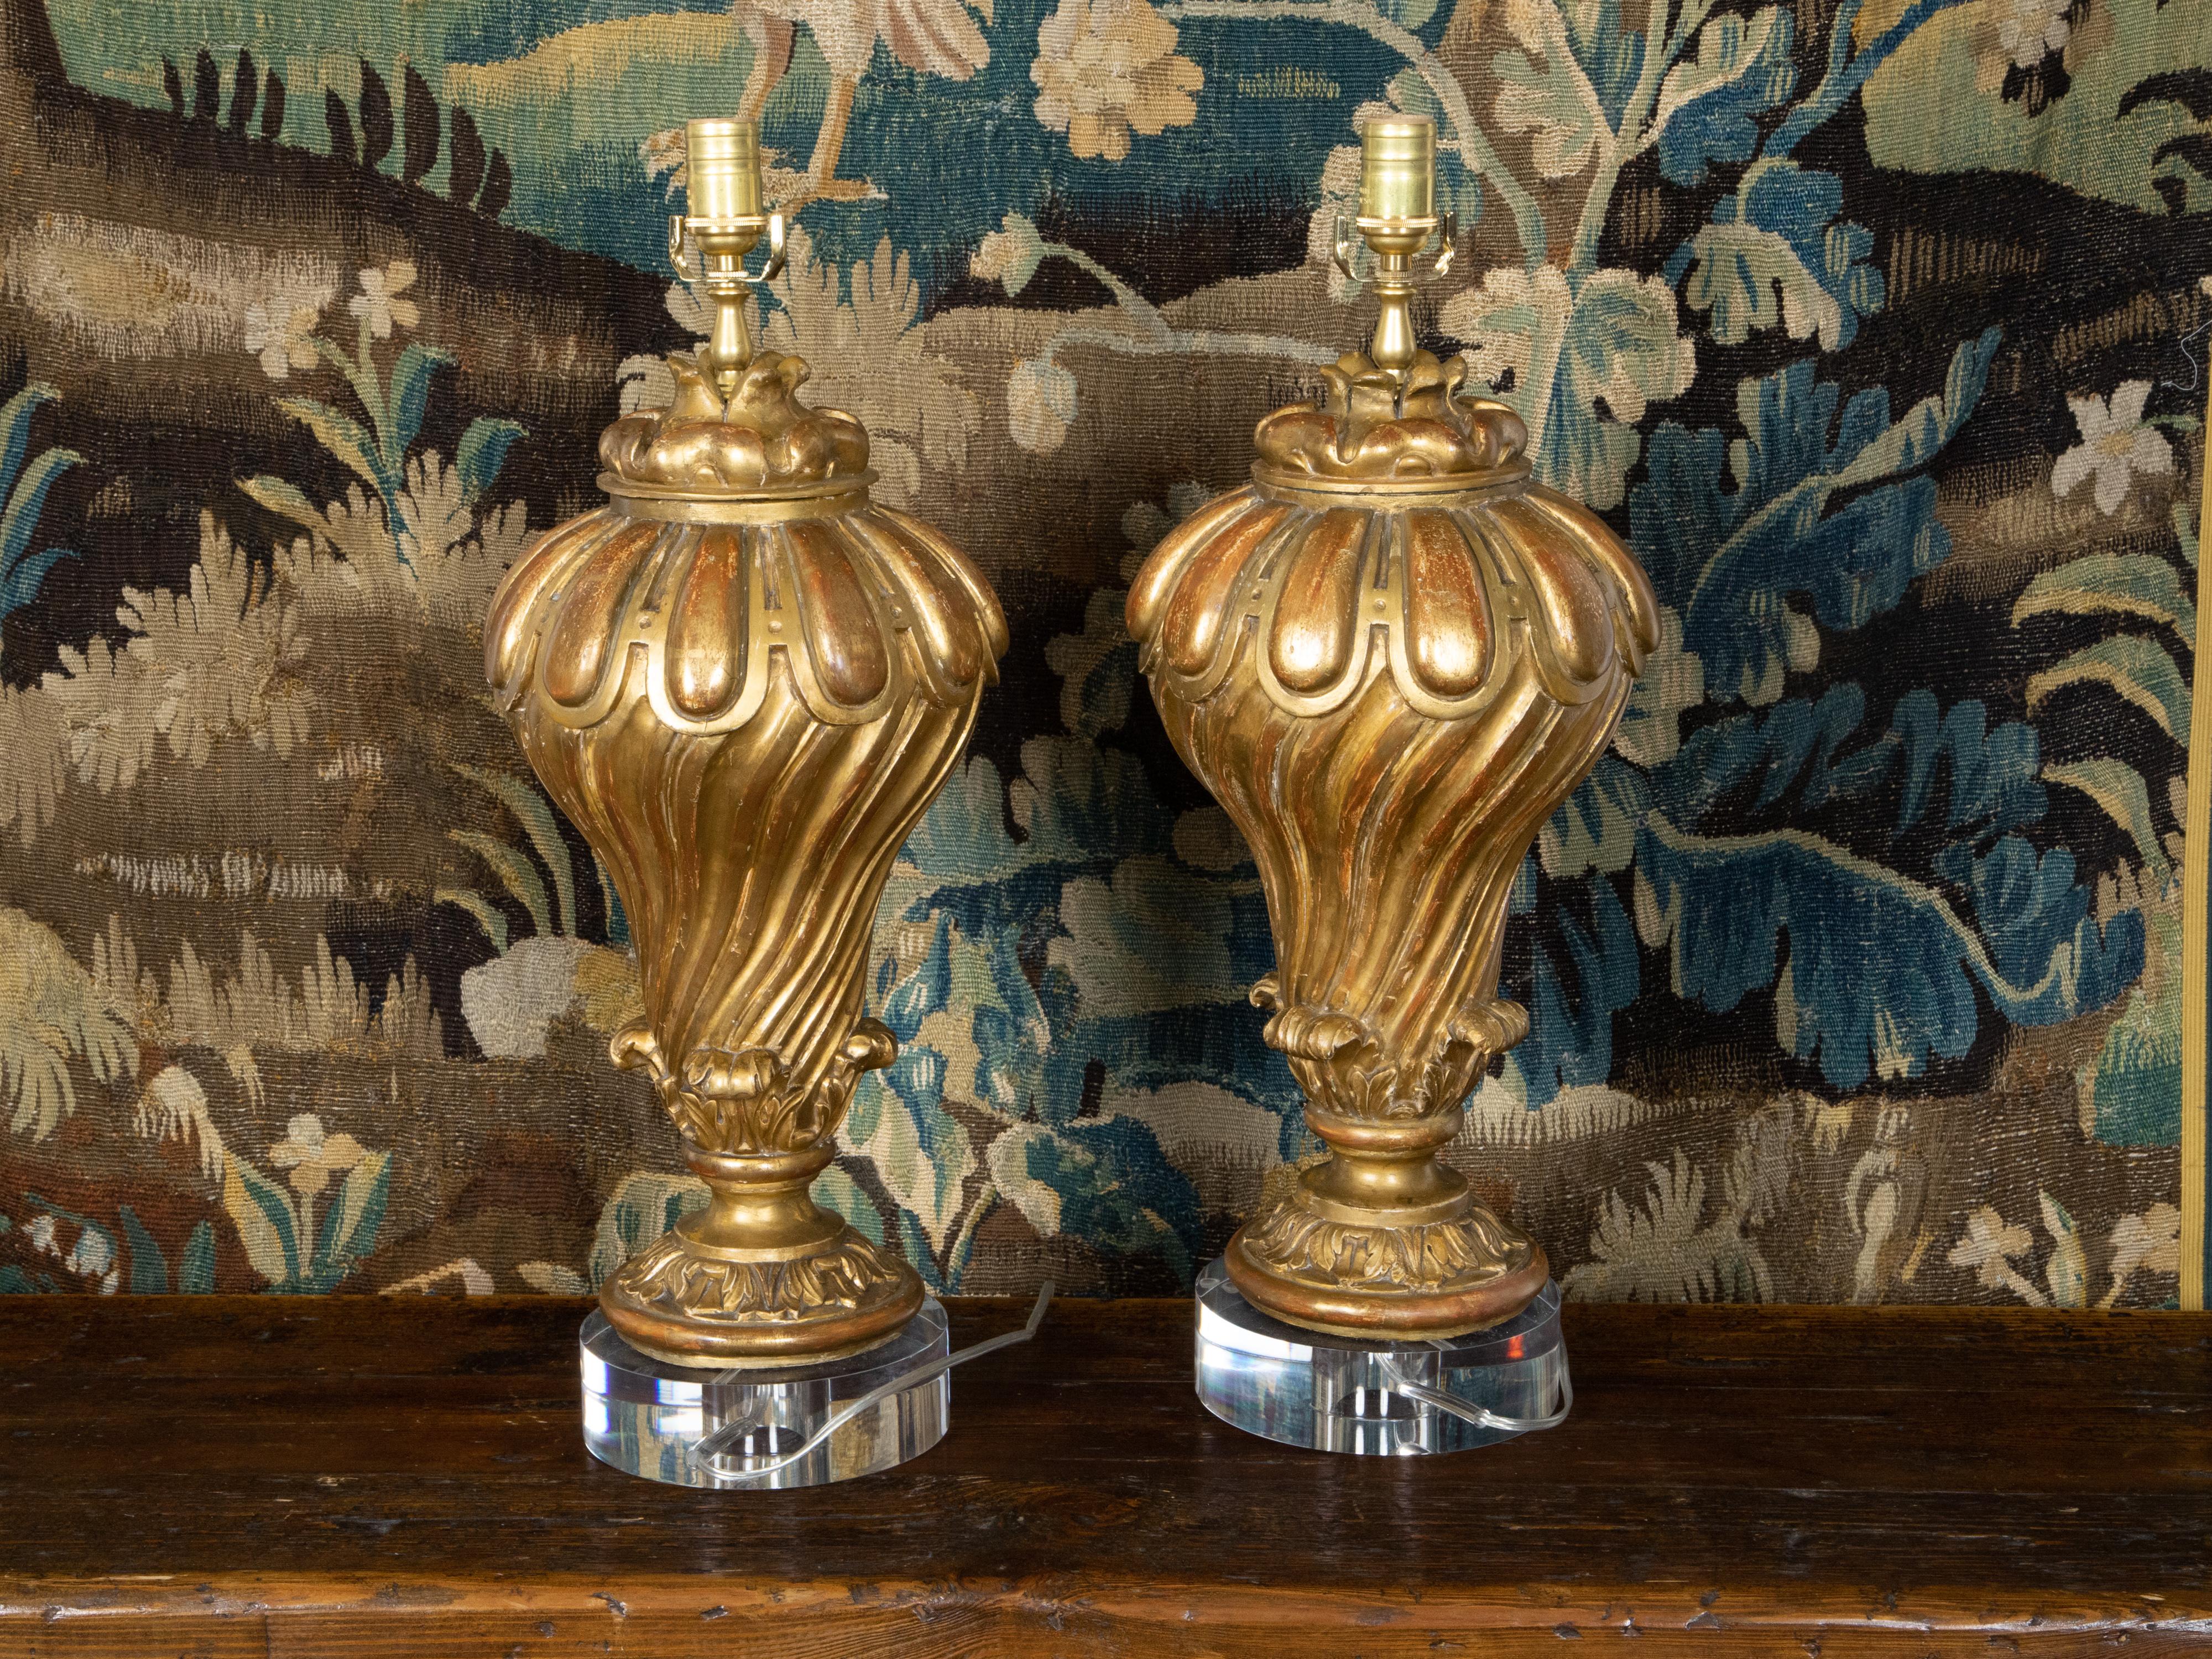 A pair of Italian carved giltwood fragments from the 19th century made into table lamps and mounted on custom lucite bases, wired for the USA. Created in Italy during the 19th century, each of this pair of fragments is made of giltwood with slight